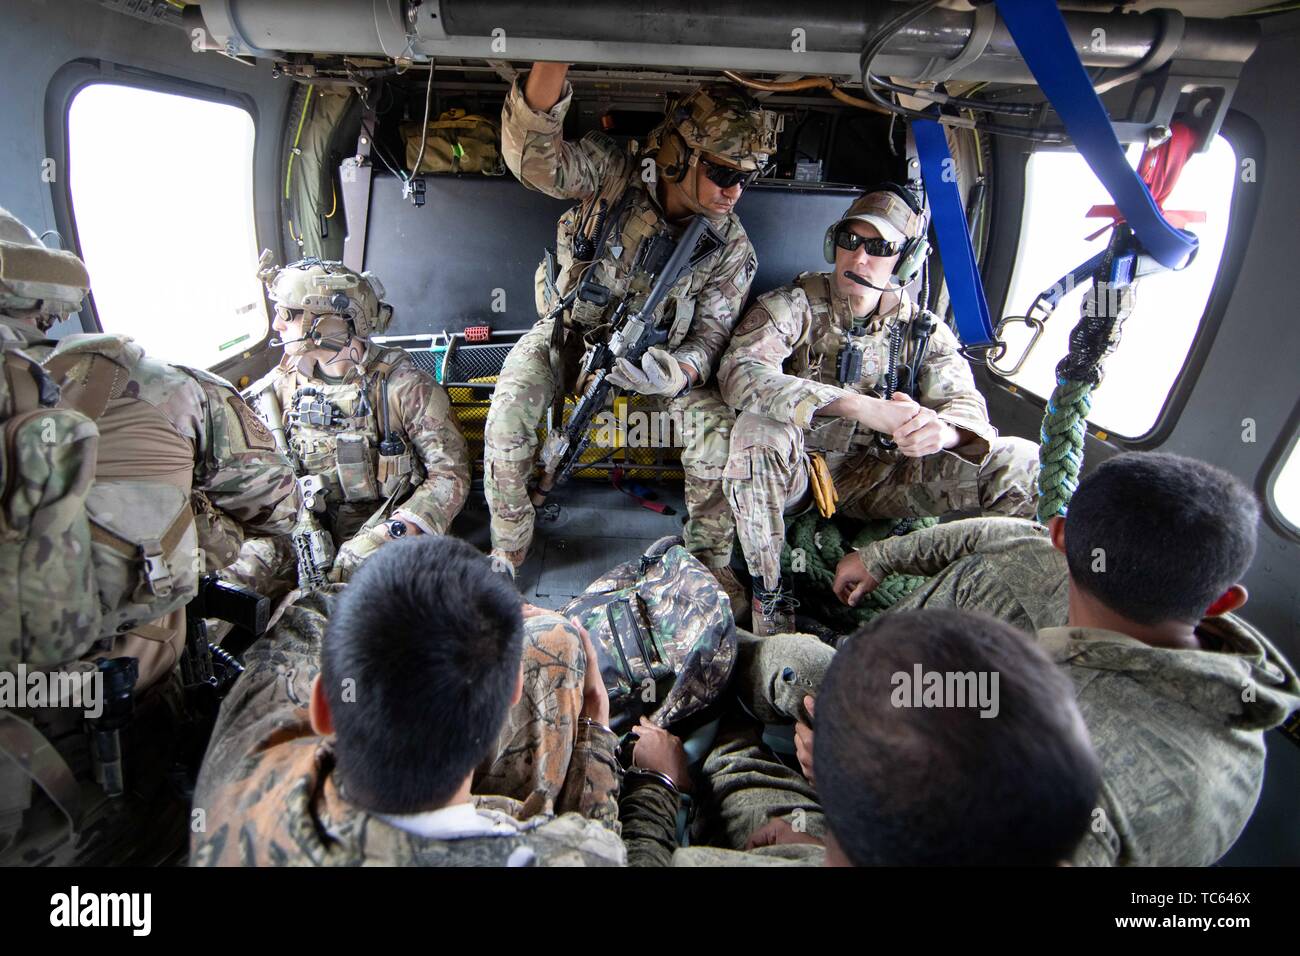 U.S. Border Patrol onboard a Blackhawk helicopter transport a group of illegal migrants after they crossed from Mexico on the Tohono Oʼodham Indian Reservation May 22, 2019 near Pisinemo, Arizona. The faces are obscured by the Border Patrol to protect their identity. Stock Photo